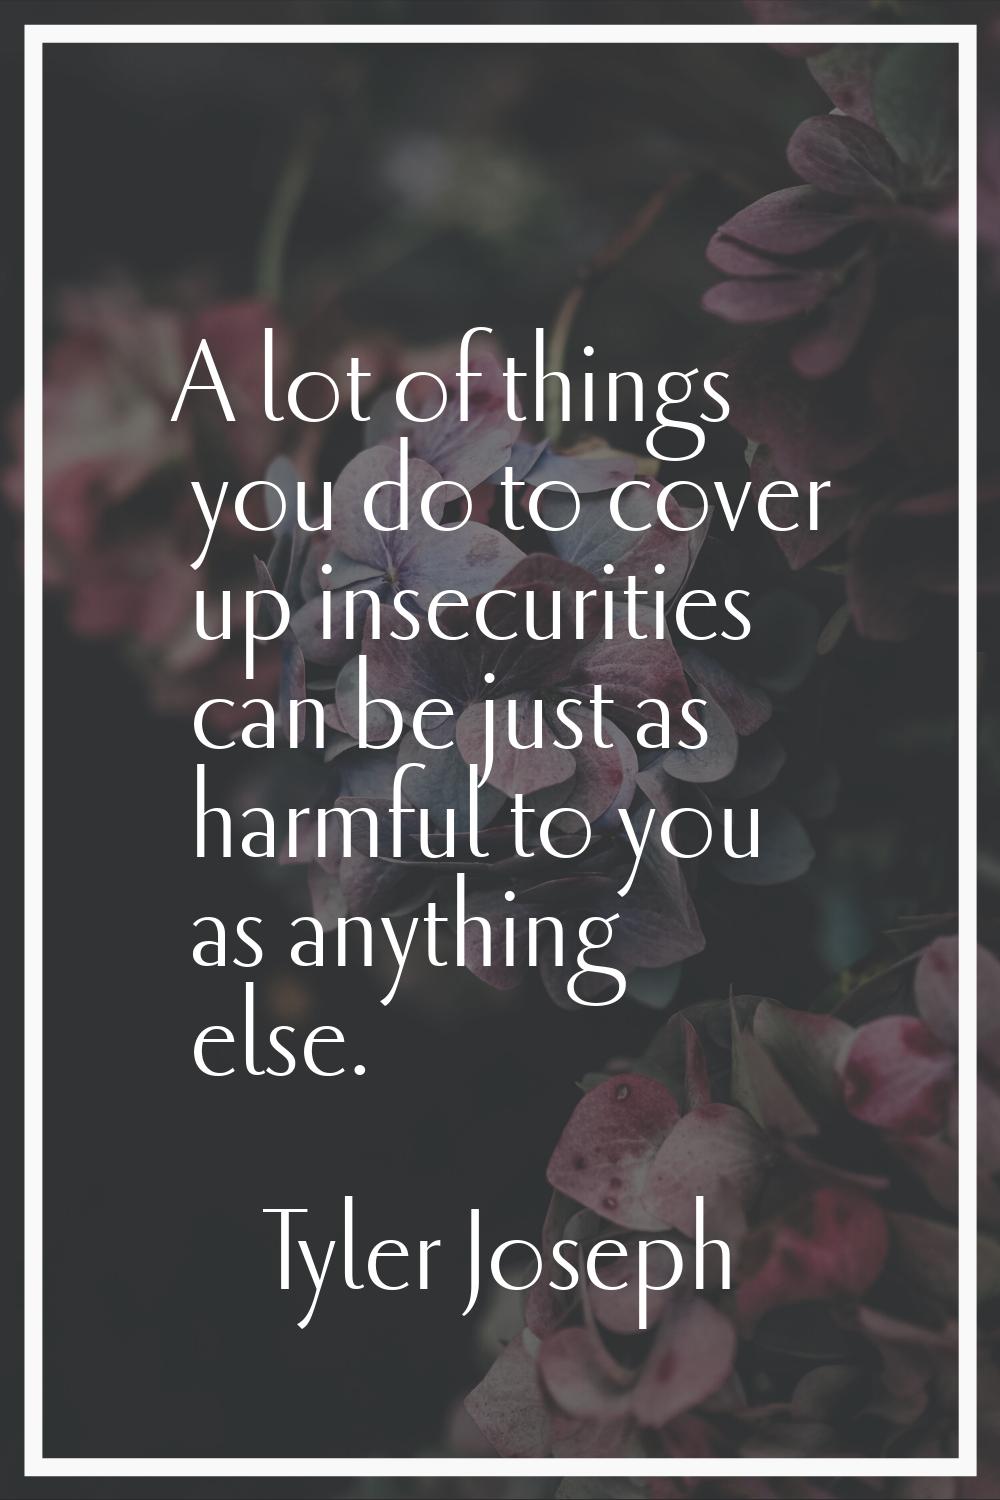 A lot of things you do to cover up insecurities can be just as harmful to you as anything else.